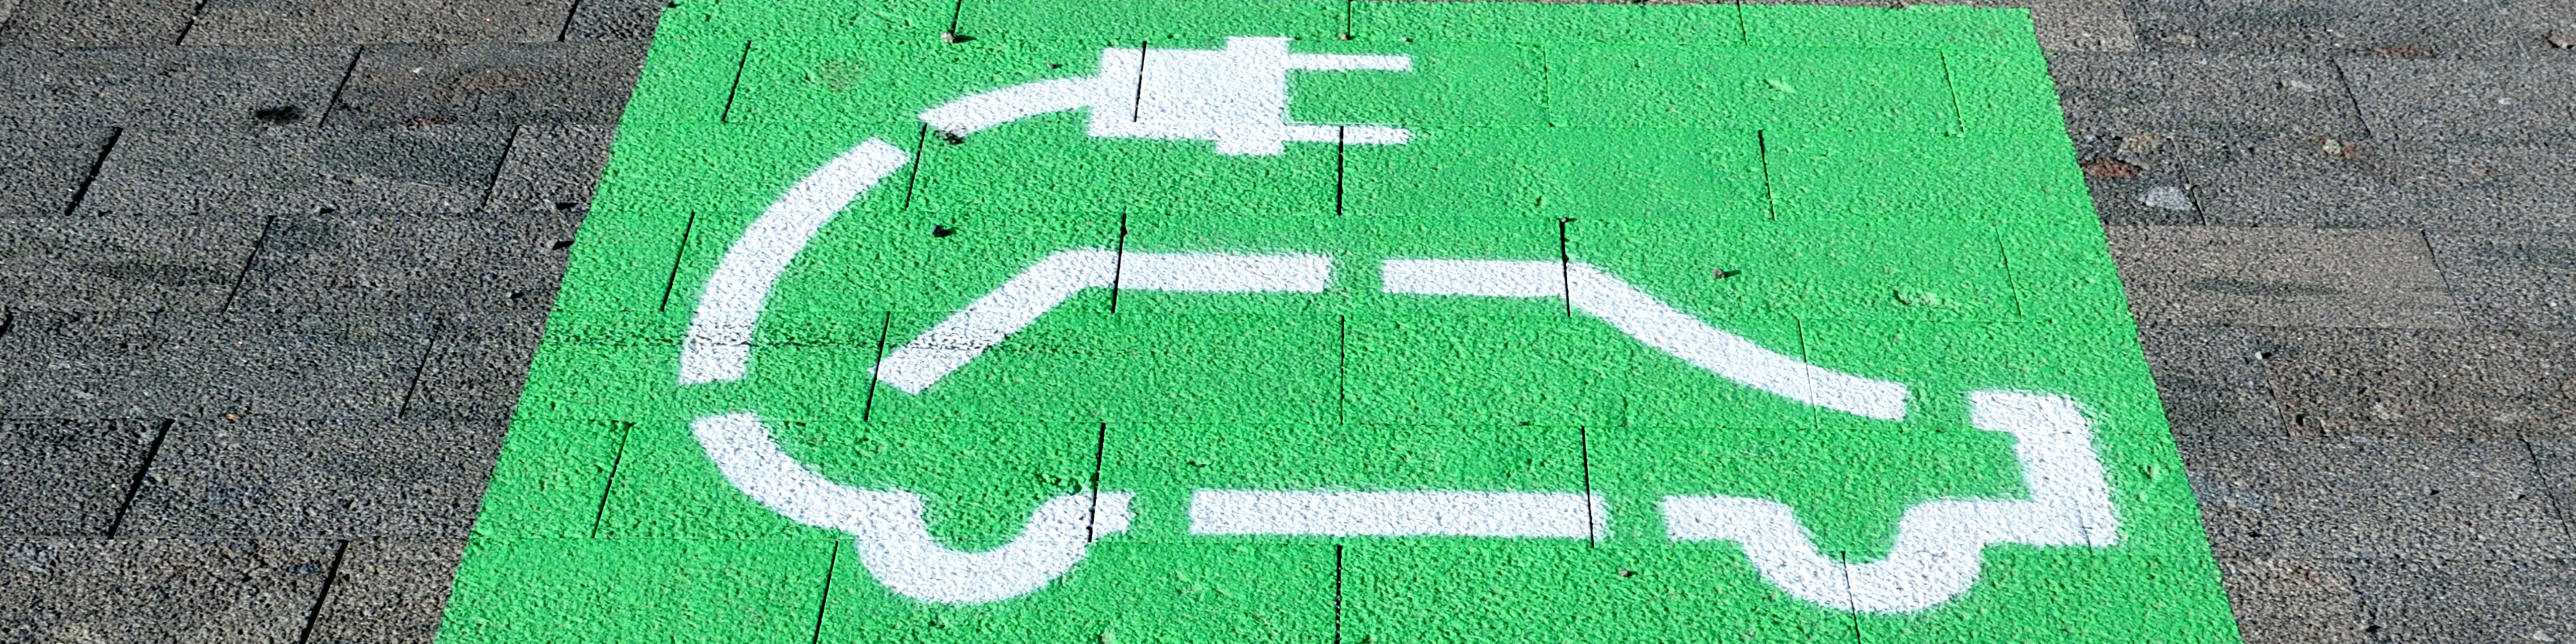 Green parking sign painting on a road to recharge electric car